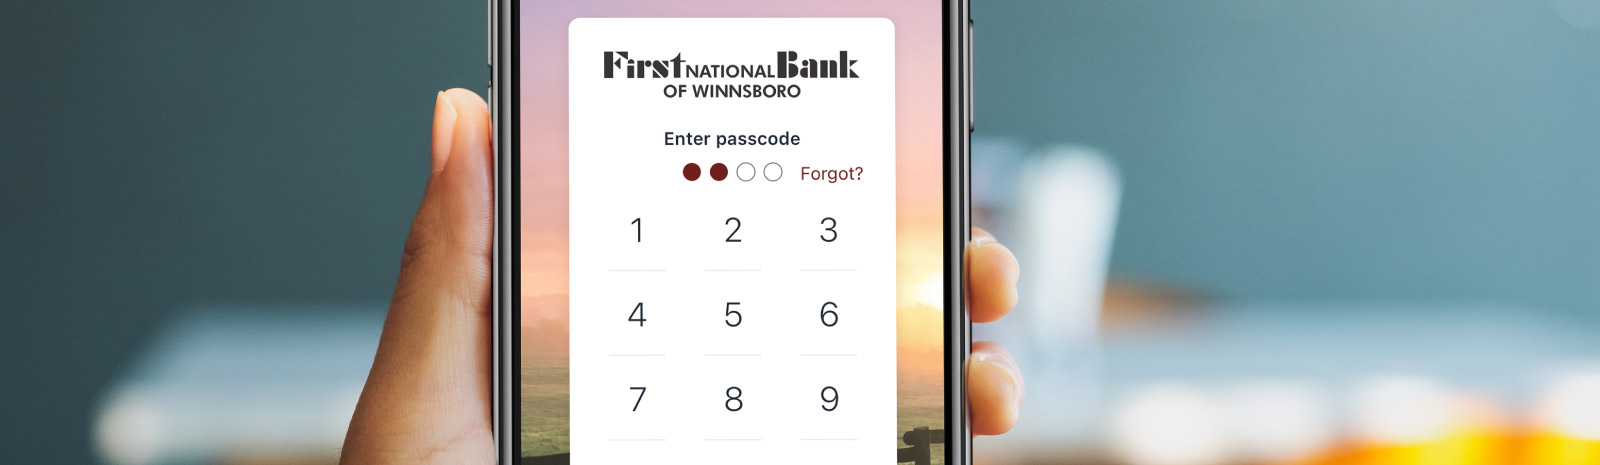 First National Bank Winnsboro mobile app on a phone